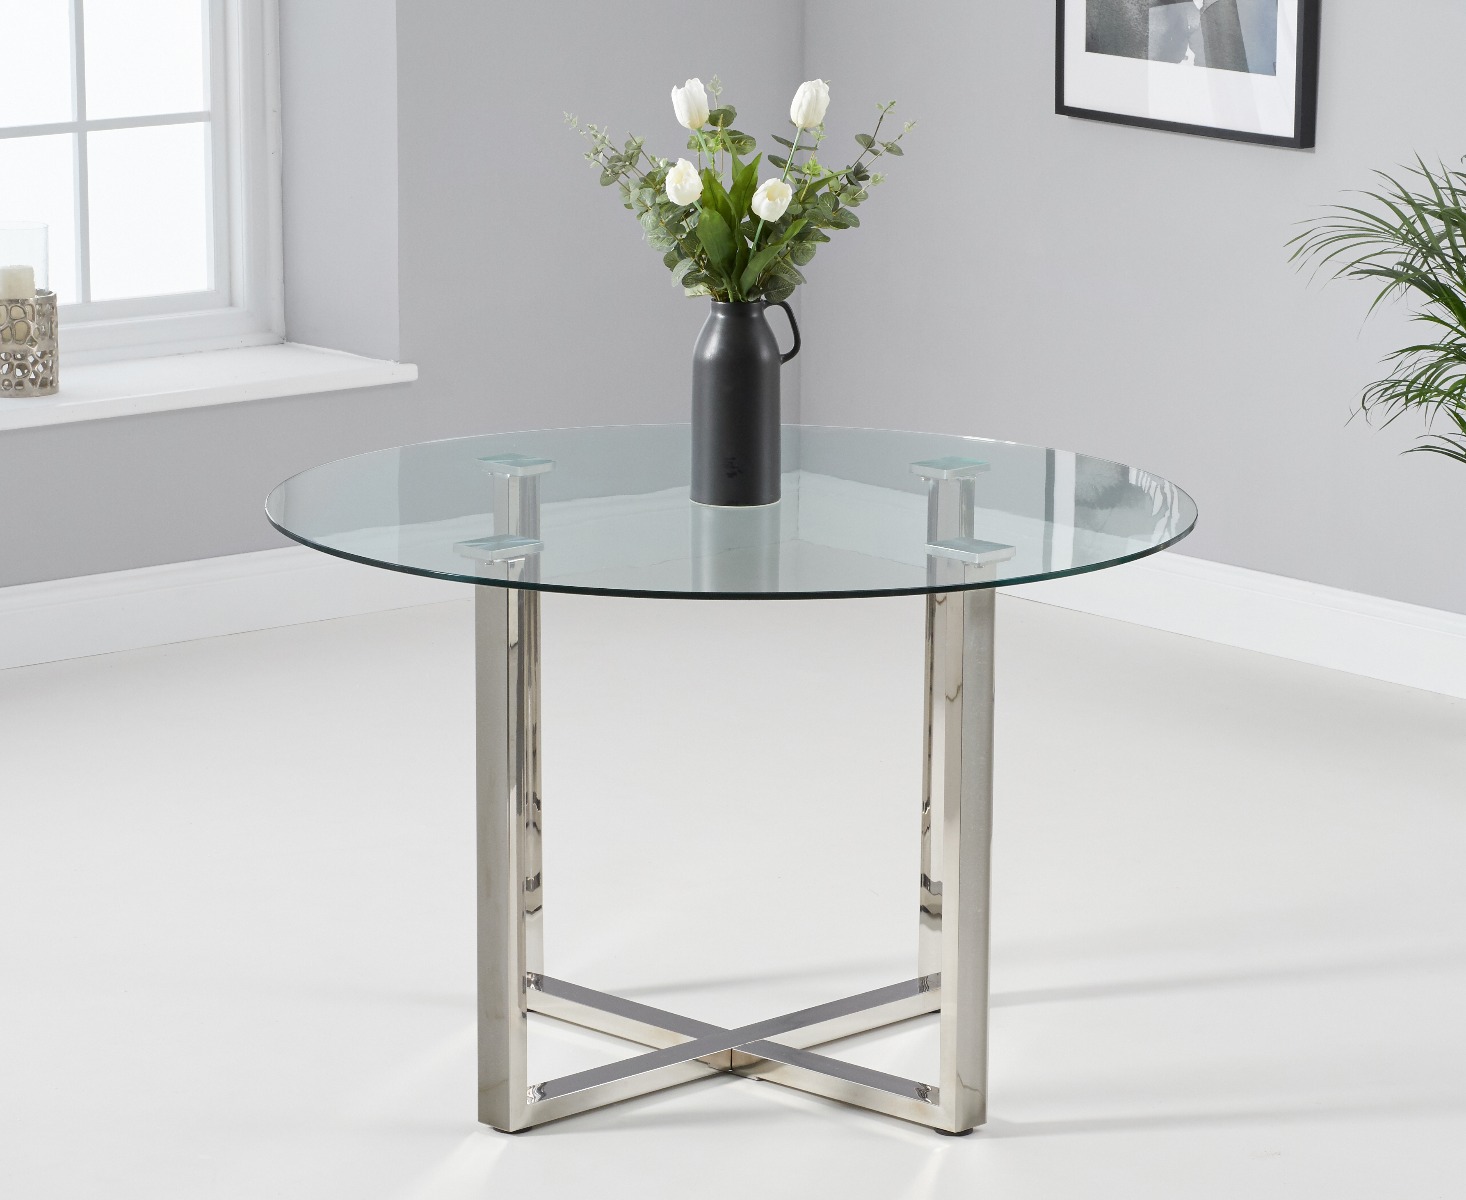 Photo 1 of Vaso 120cm round glass dining table with 4 black marco chairs